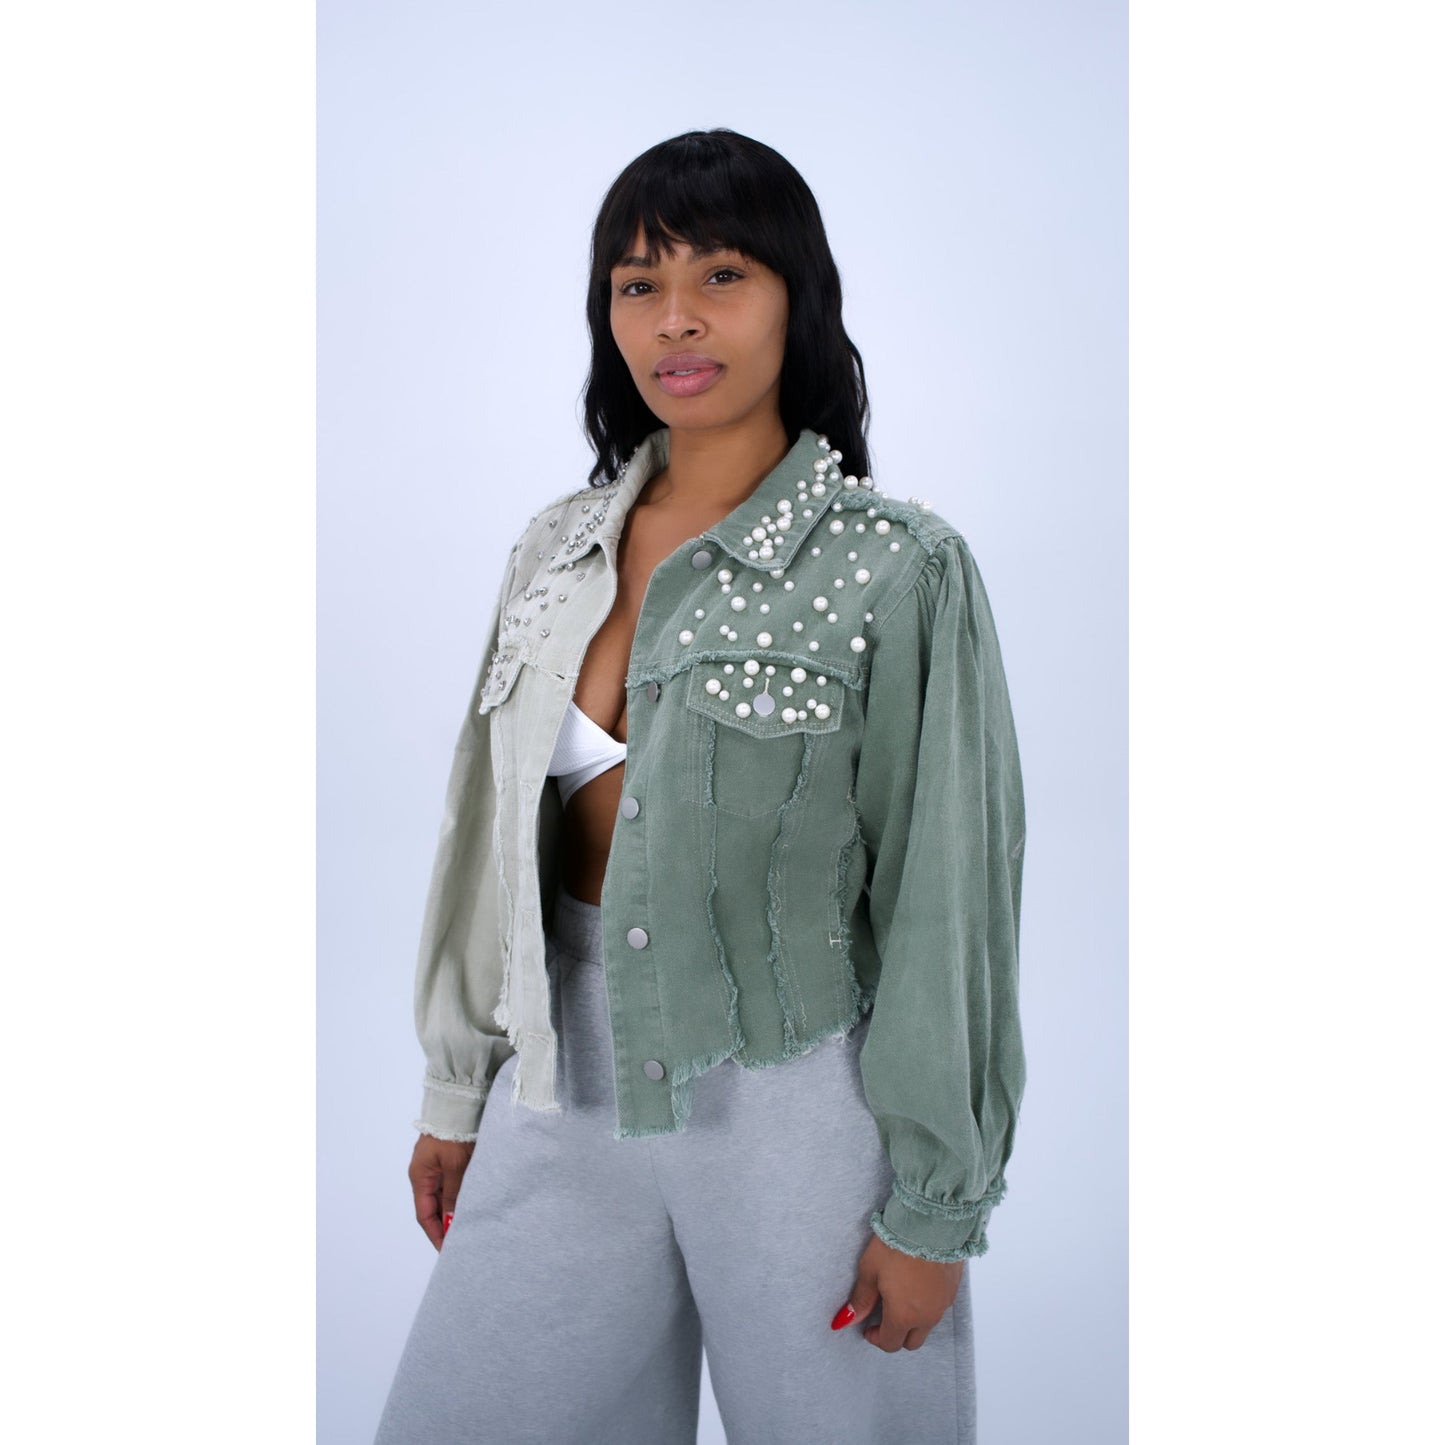 Diamonds and Pearls cropped blouson jacket